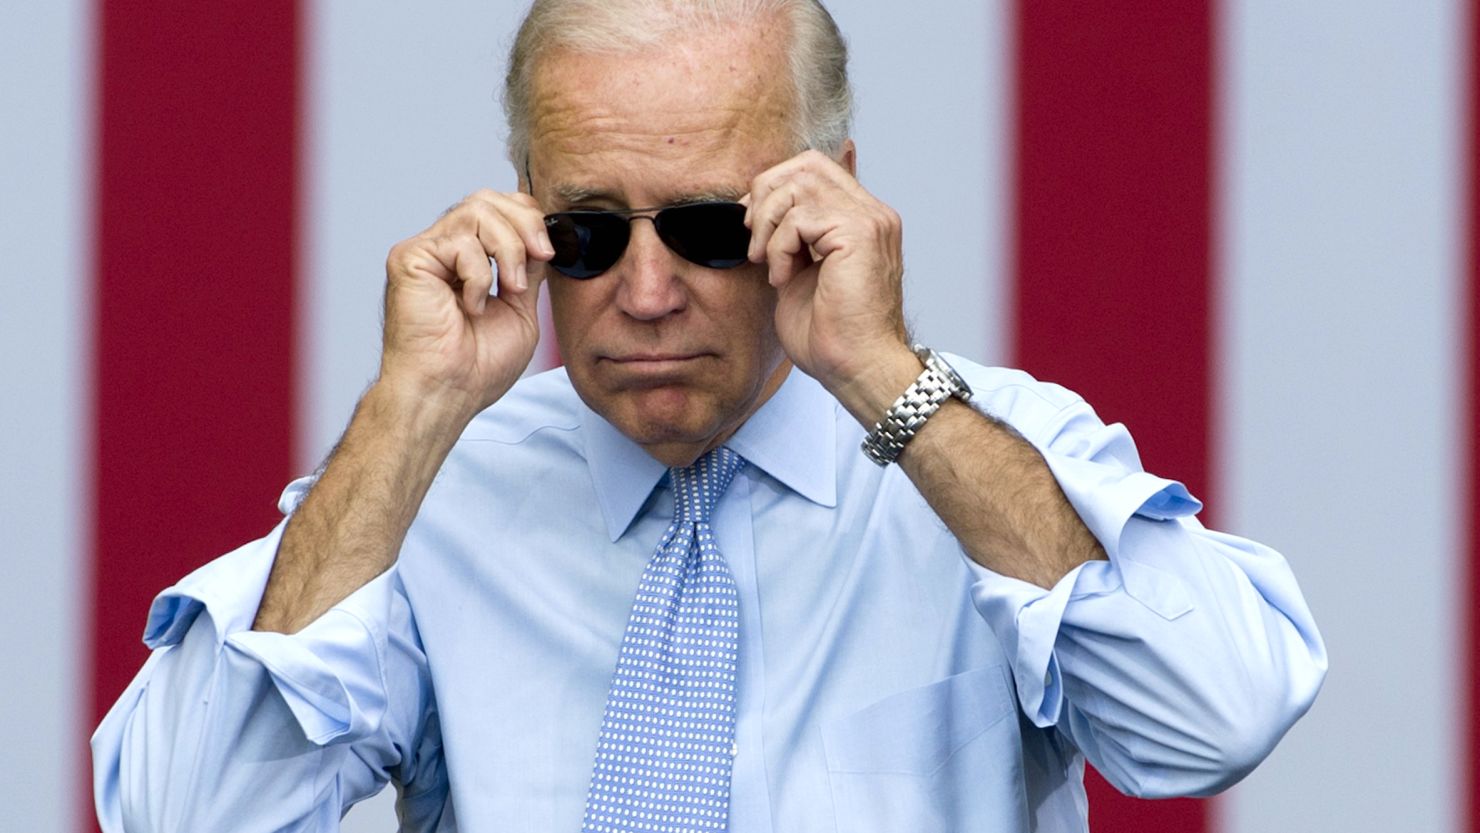 Vice President Joe Biden takes his sunglasses off as he arrives for a campaign event with President Barack Obama in Portsmouth, New Hampshire on Sept. 7, 2012. 